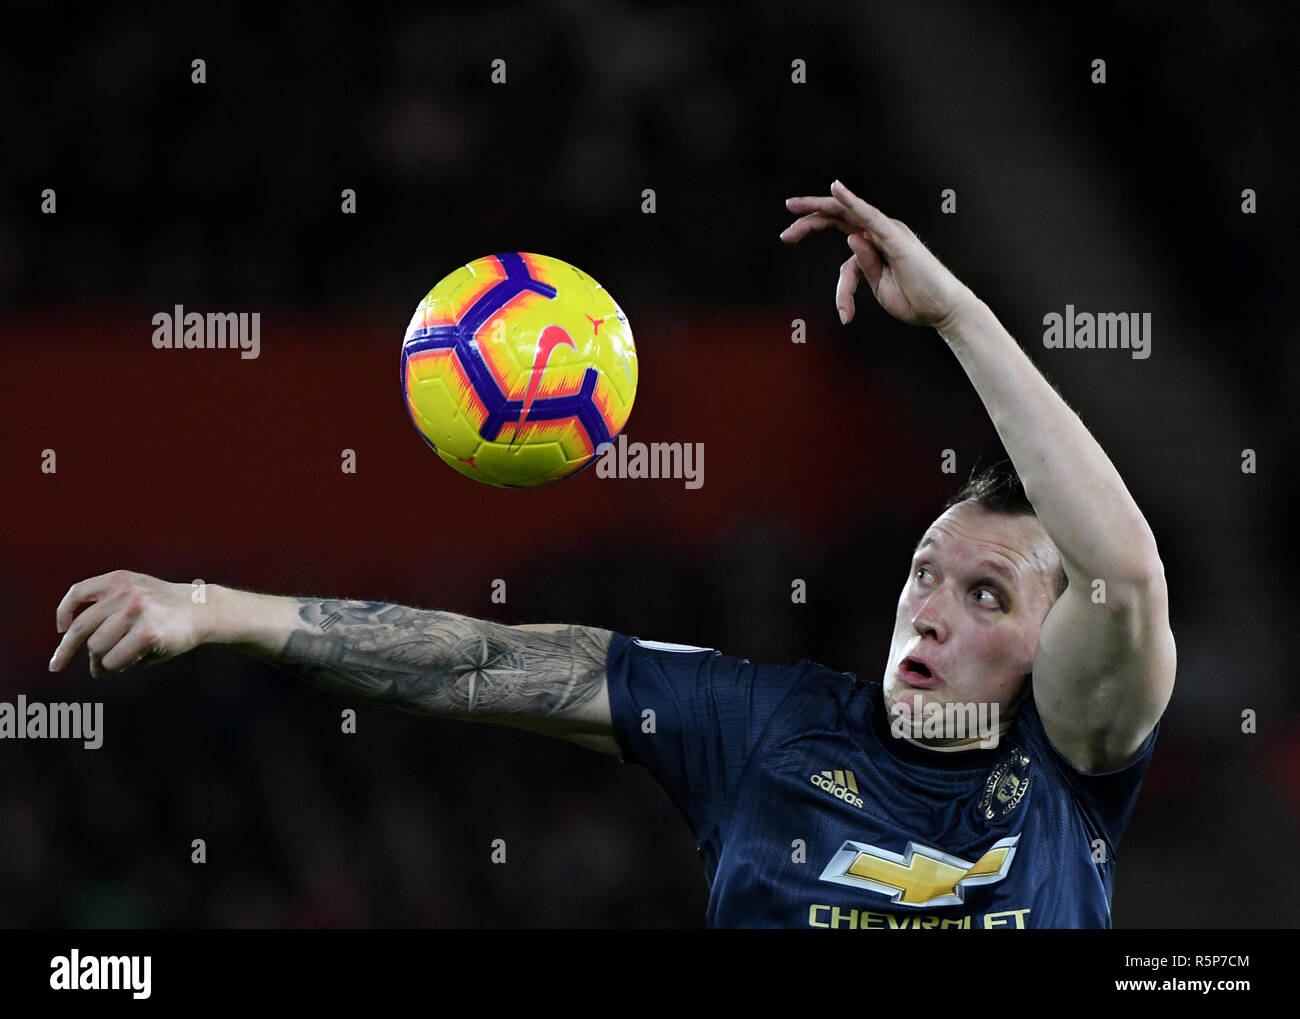 Southampton, UK. 1st December, 2018. Phil Jones of Manchester United l- Southampton v Manchester United, Premier League, St Mary's Stadium, Southampton - 1st December 2018  Editorial Use Only - DataCo restrictions apply Credit: MatchDay Images Limited/Alamy Live News Stock Photo